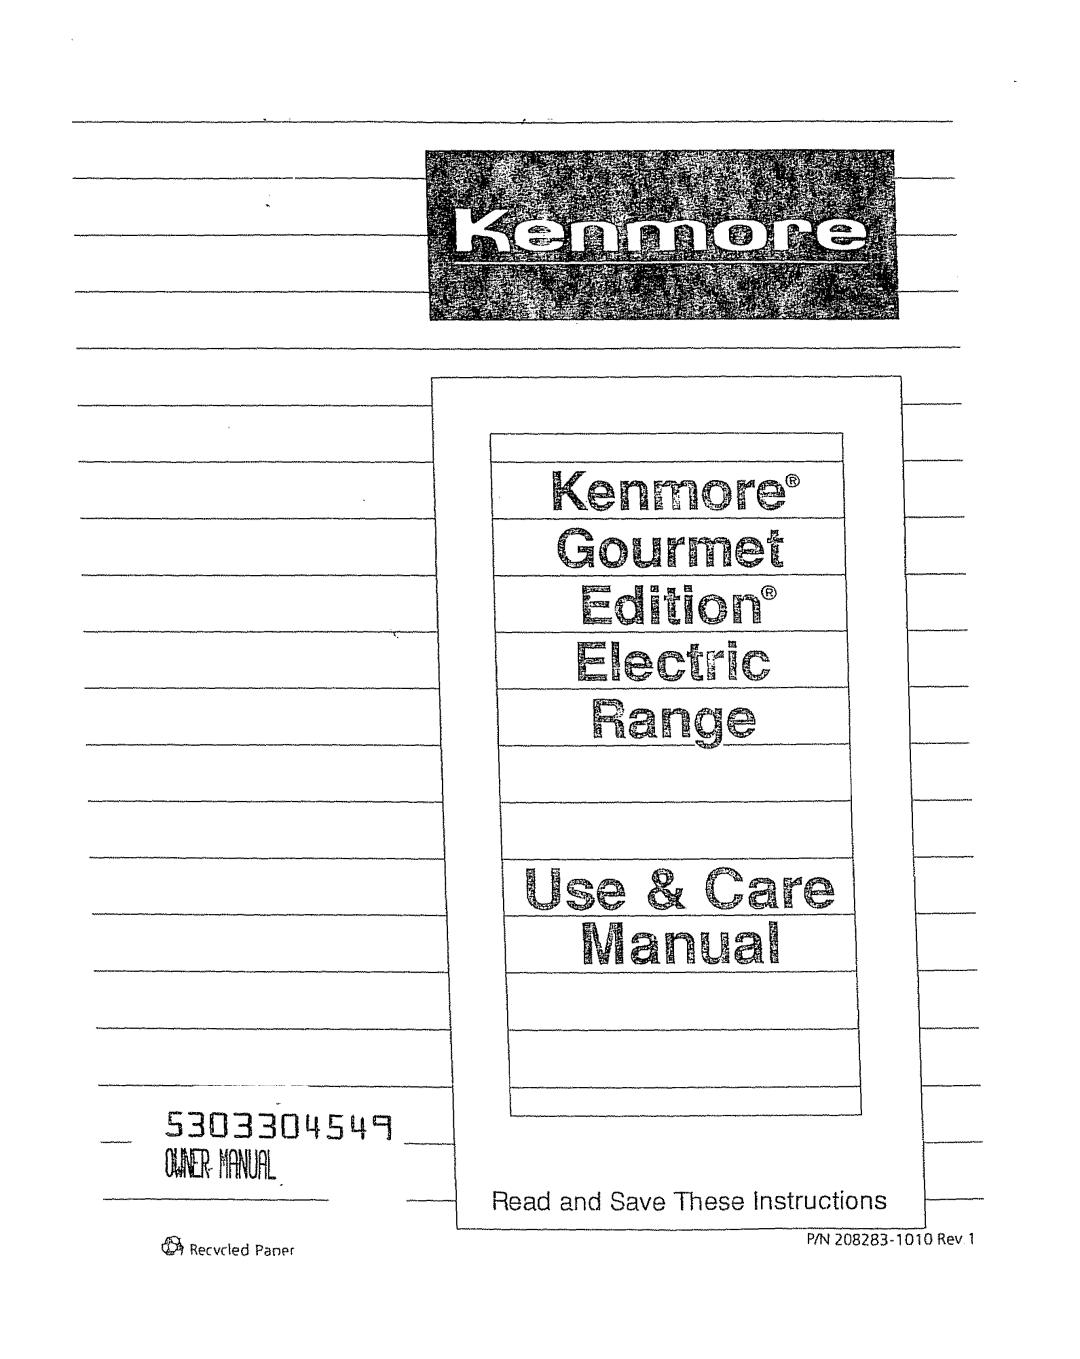 Kenmore 5303304549 manual Read and Save These Instructions, I MP 4UFk, RecycledPaner 